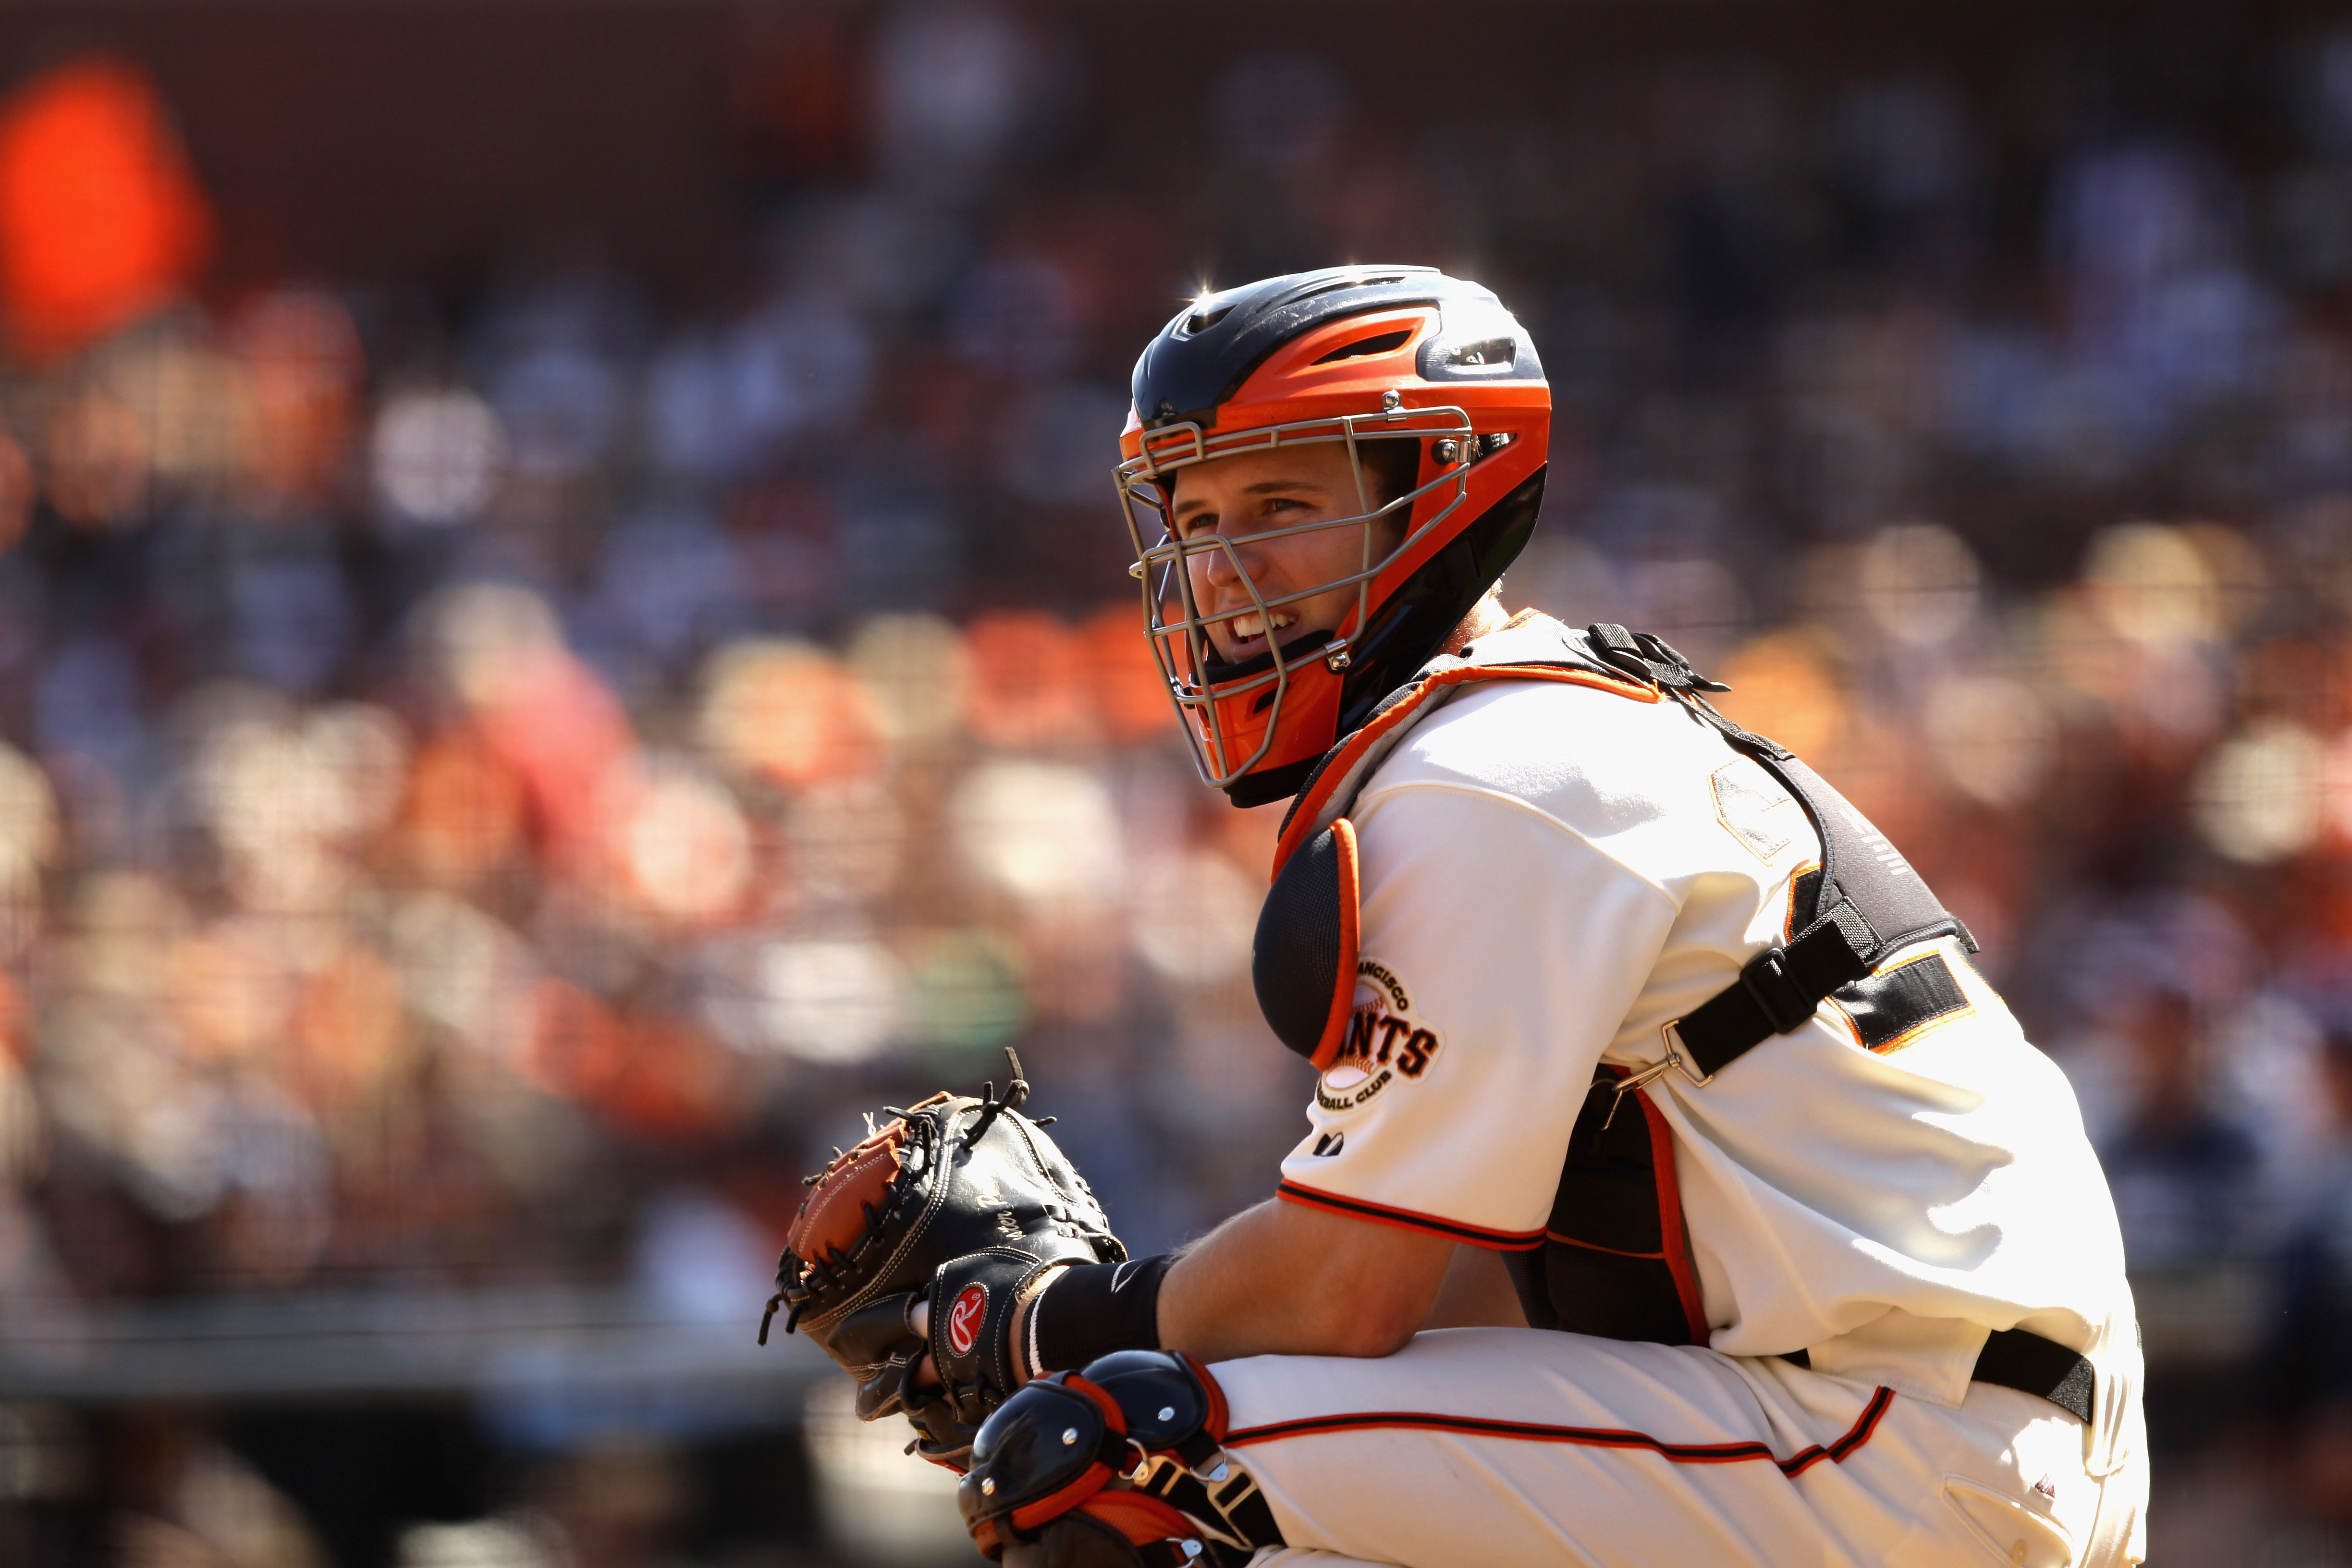 Report: San Francisco Giants catcher Buster Posey to announce